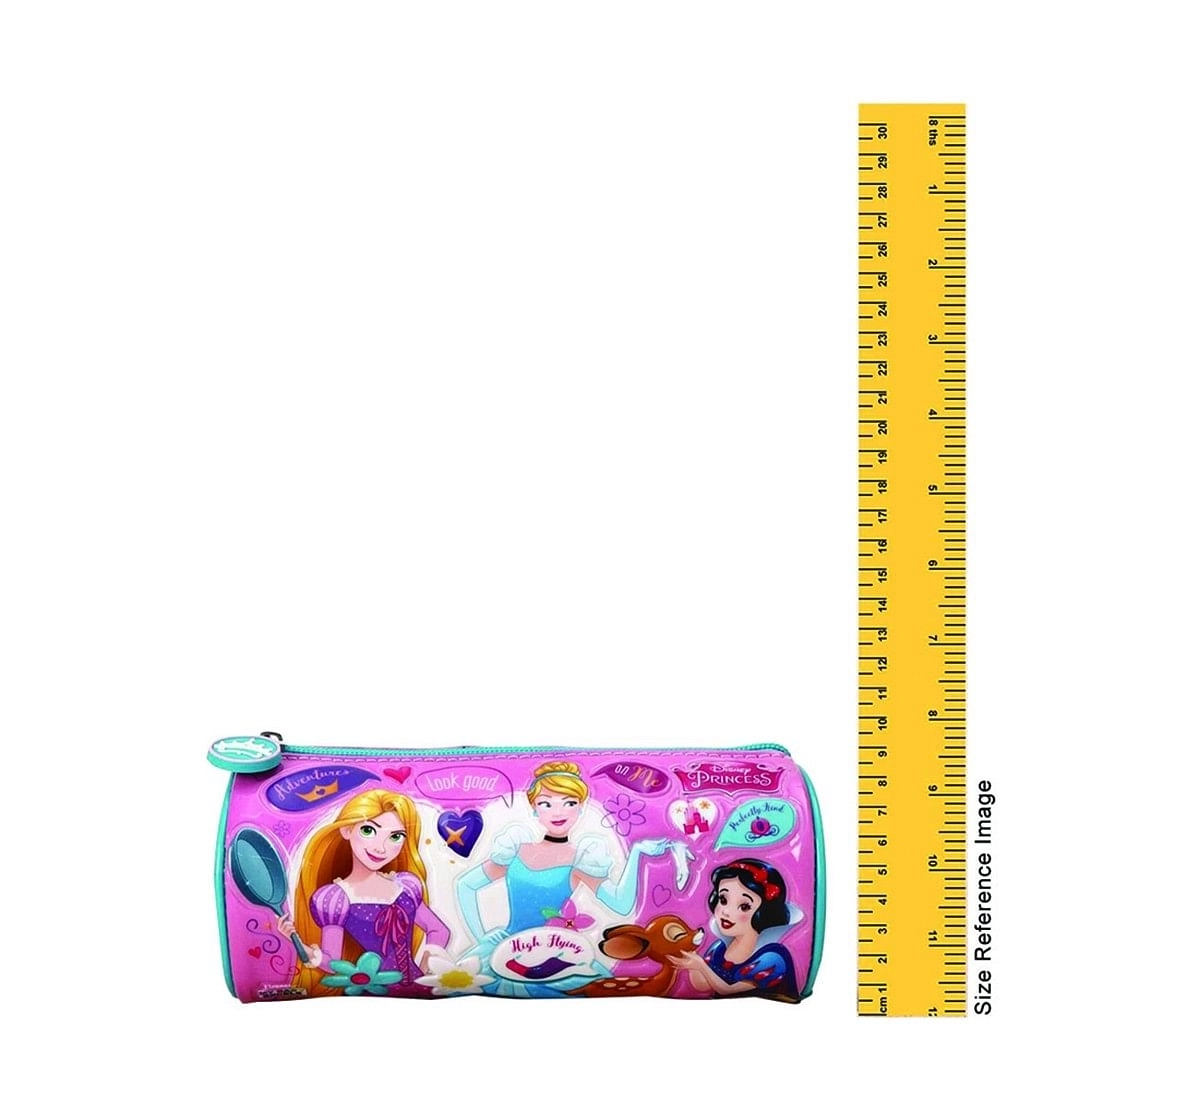 Disney Disney Princess Pink Round Pouch for, Quirky Soft Toys for  age 3Y+ - 23 Cm (Pink)